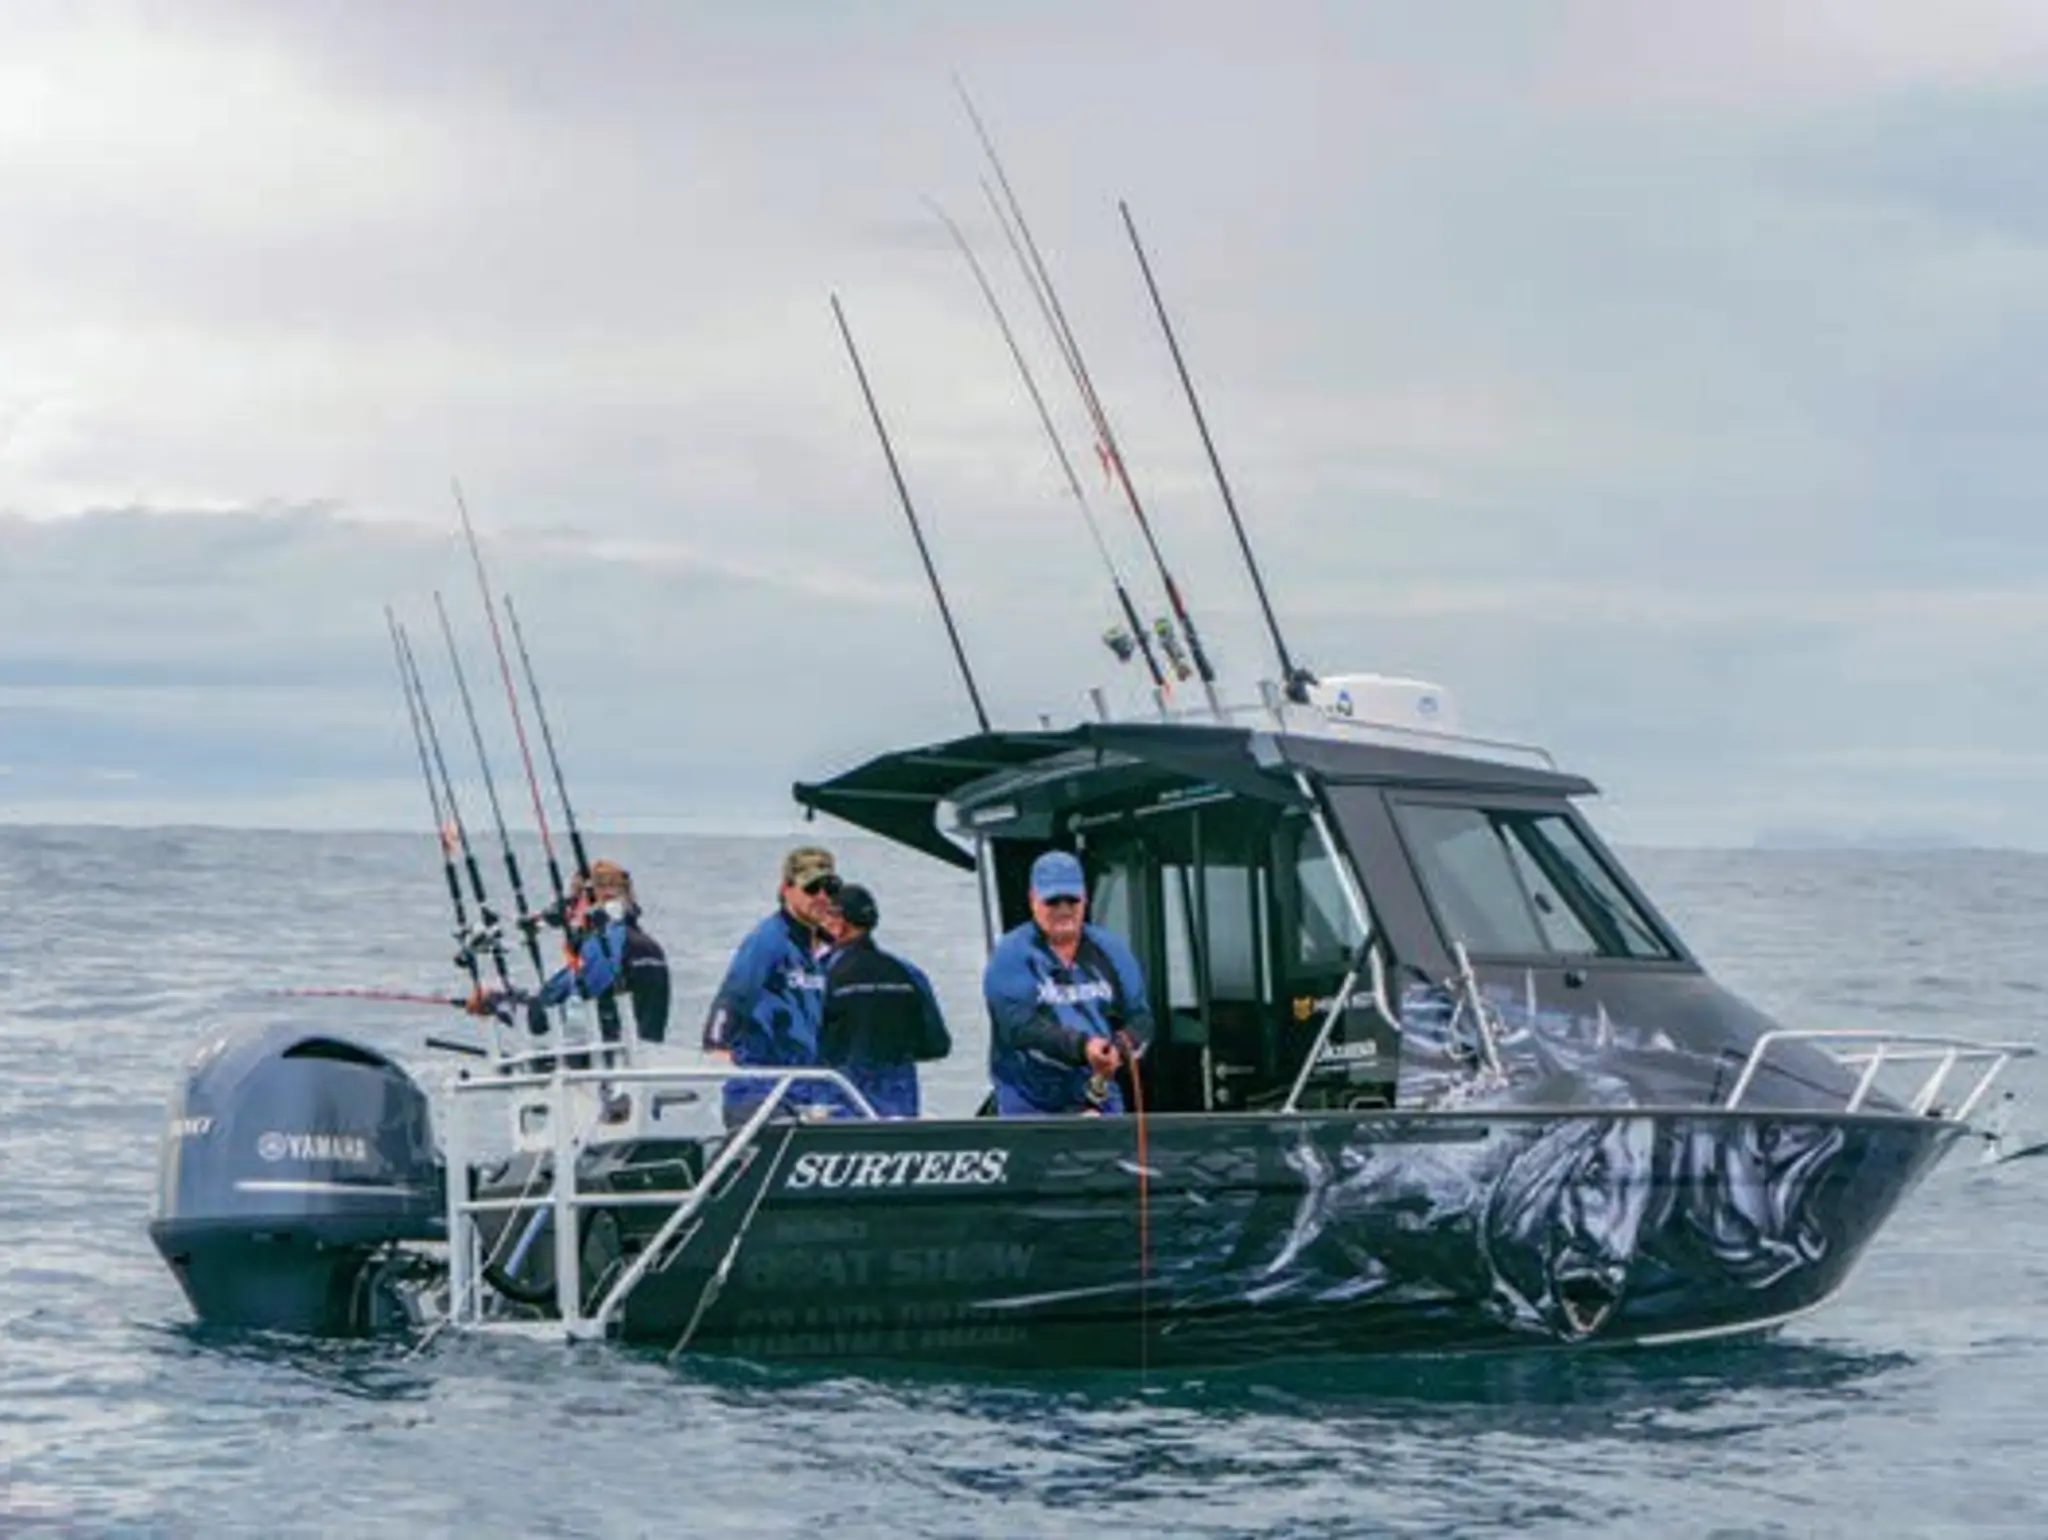 SURTEES COMPETITION HEADS TO WHITIANGA